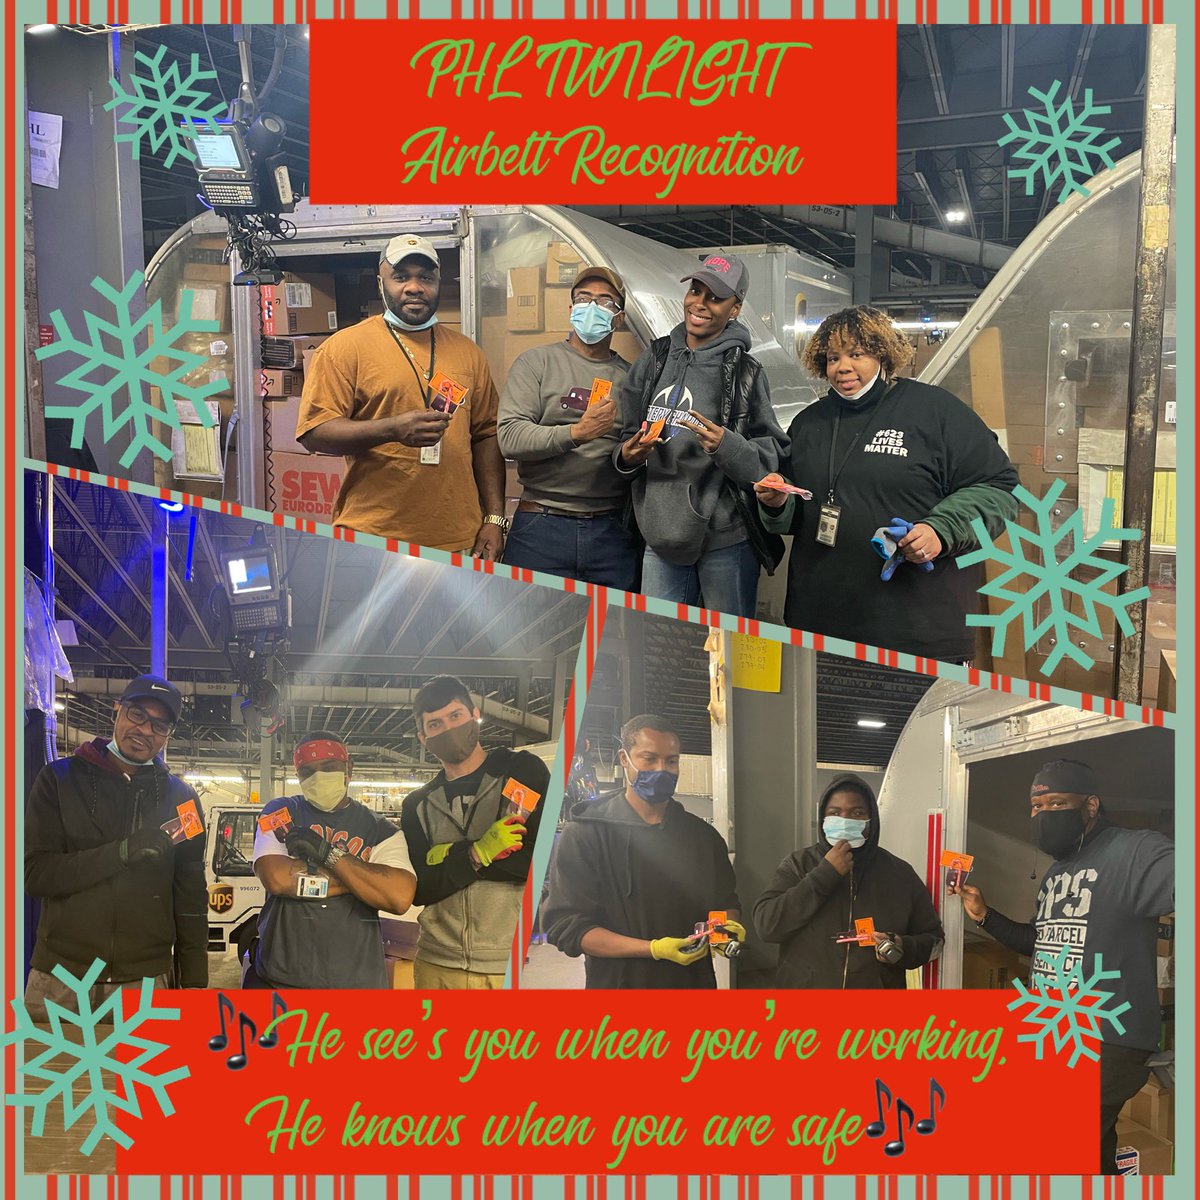 Here at PHL Twi, we recognized the hottest area in Santa’s Workshop. Great job to all the Ladies & Gents that work this belt throughout the year. Random Recognition for Team Work & Load Quality. @BobKee6 @MichelleRobUPS @JohnEitel2 @BrownDenelle